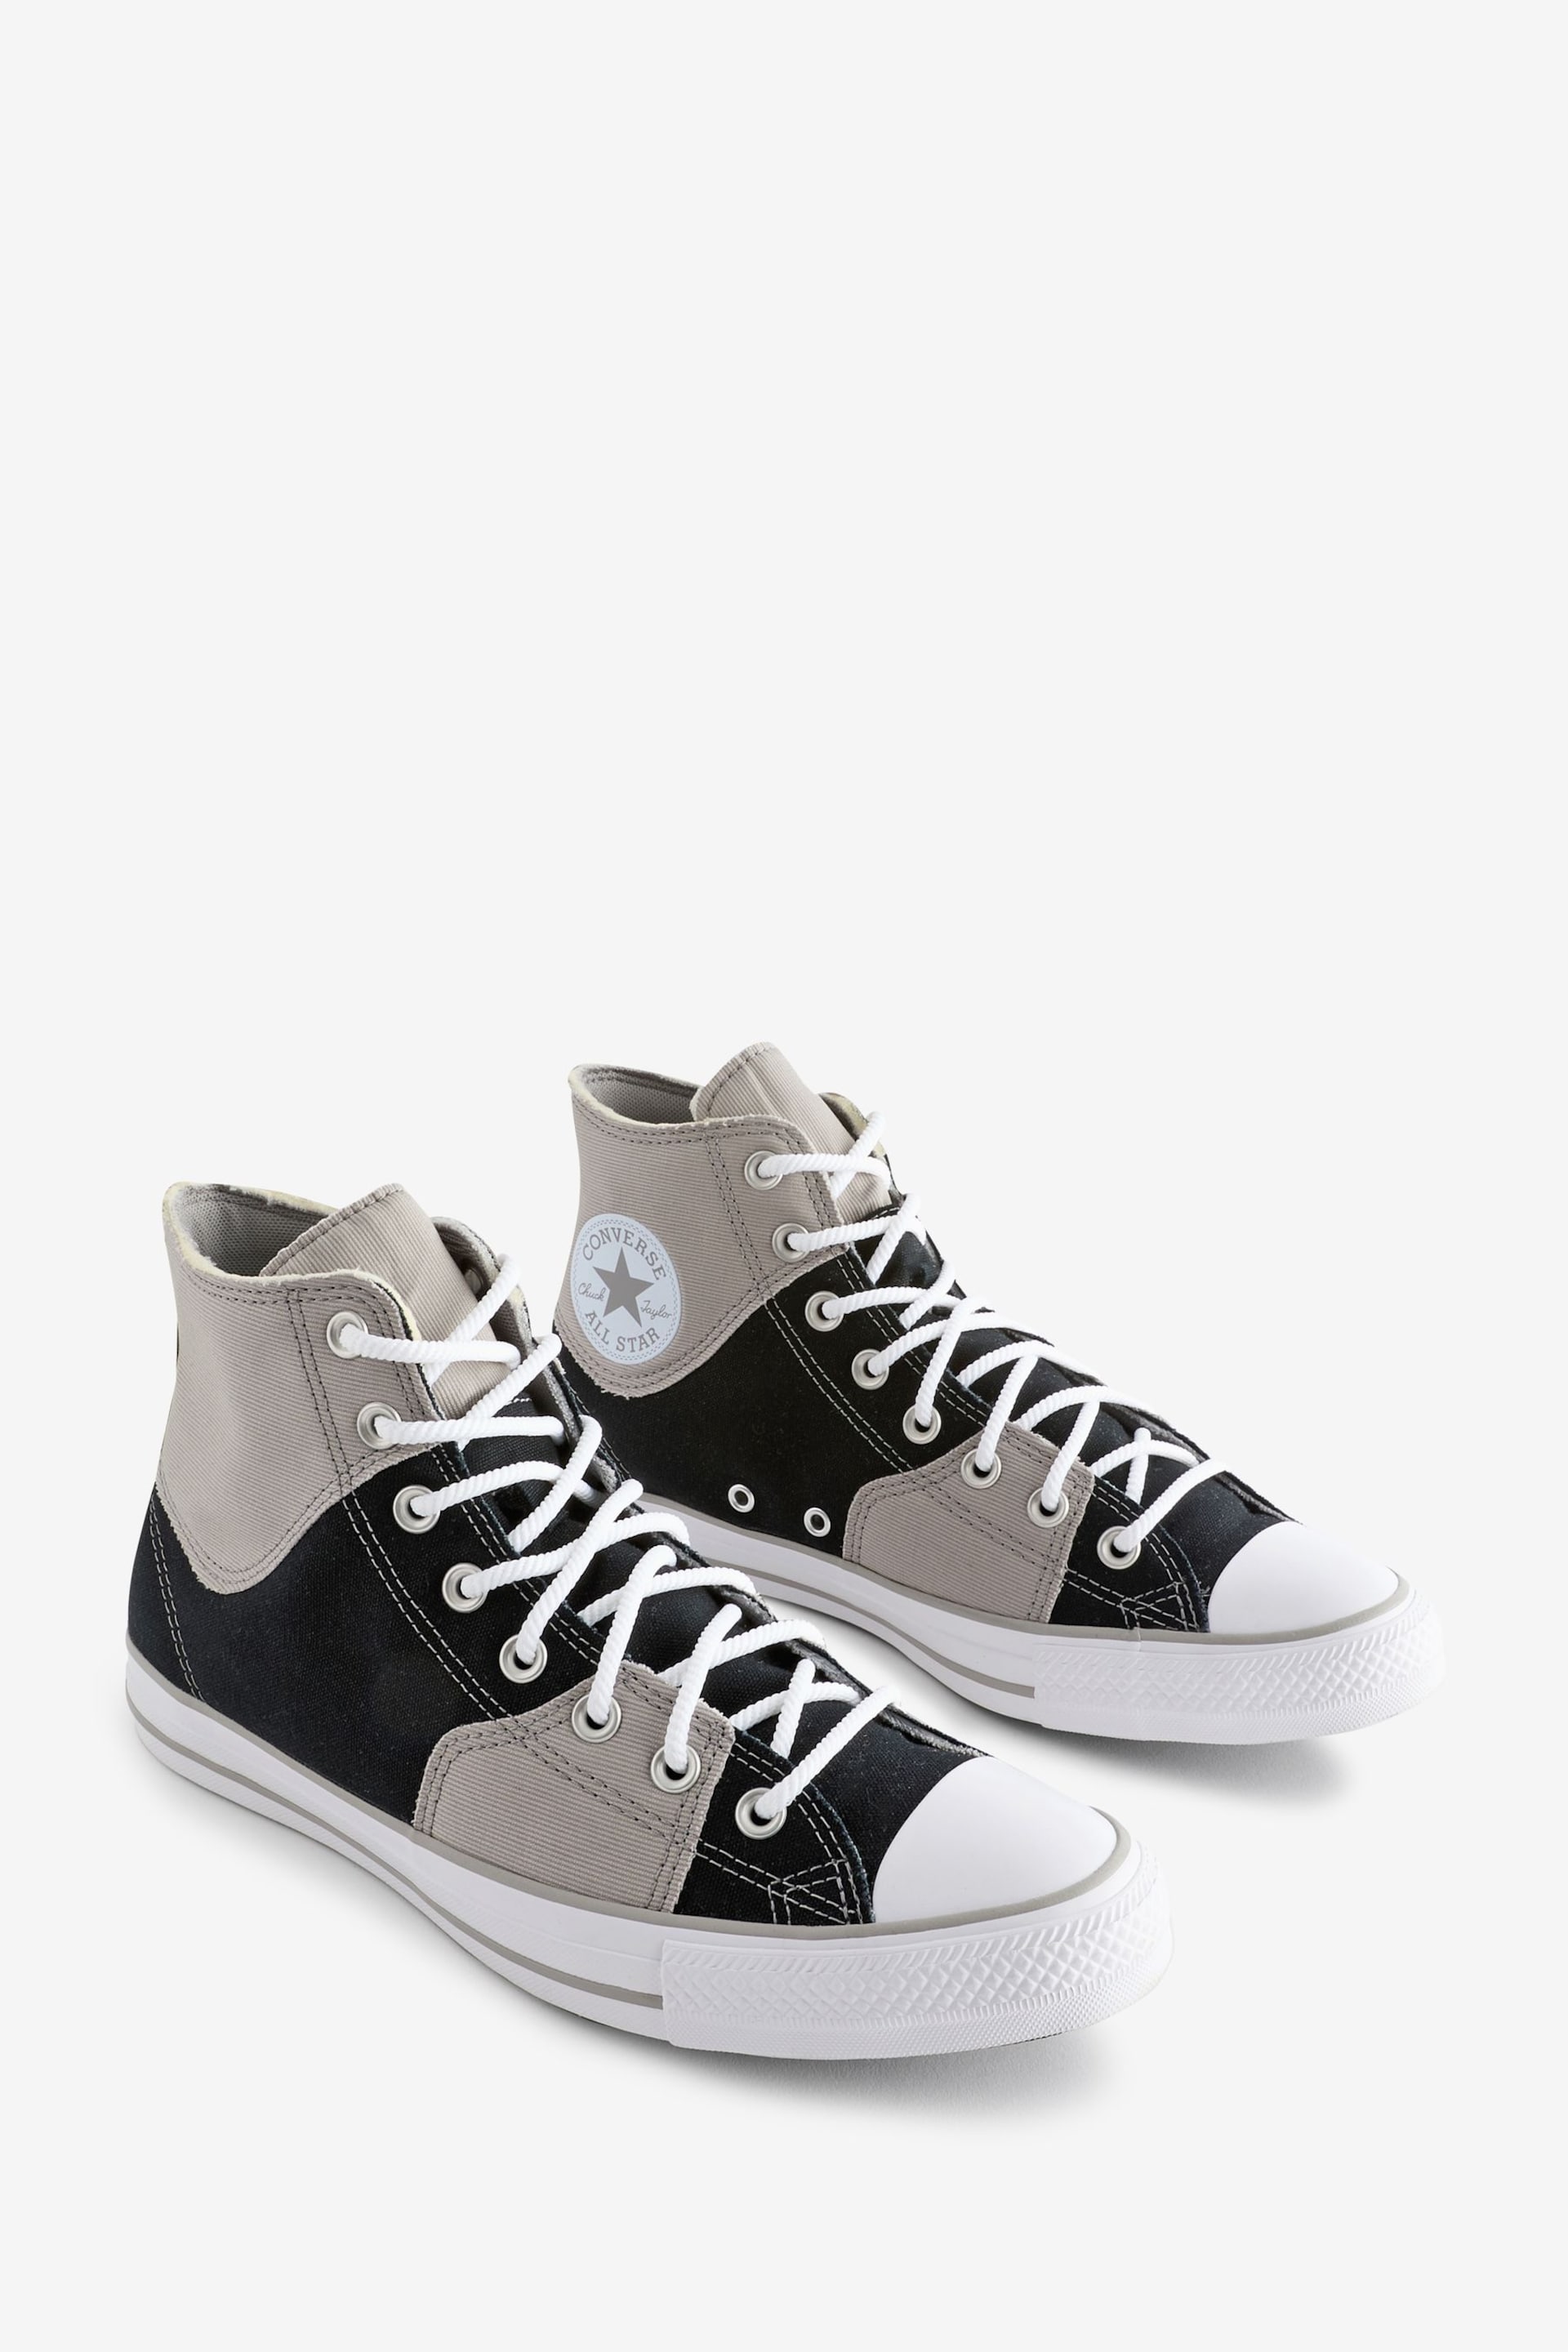 Converse Natural Chuck Taylor All Star Trainers - Image 3 of 9